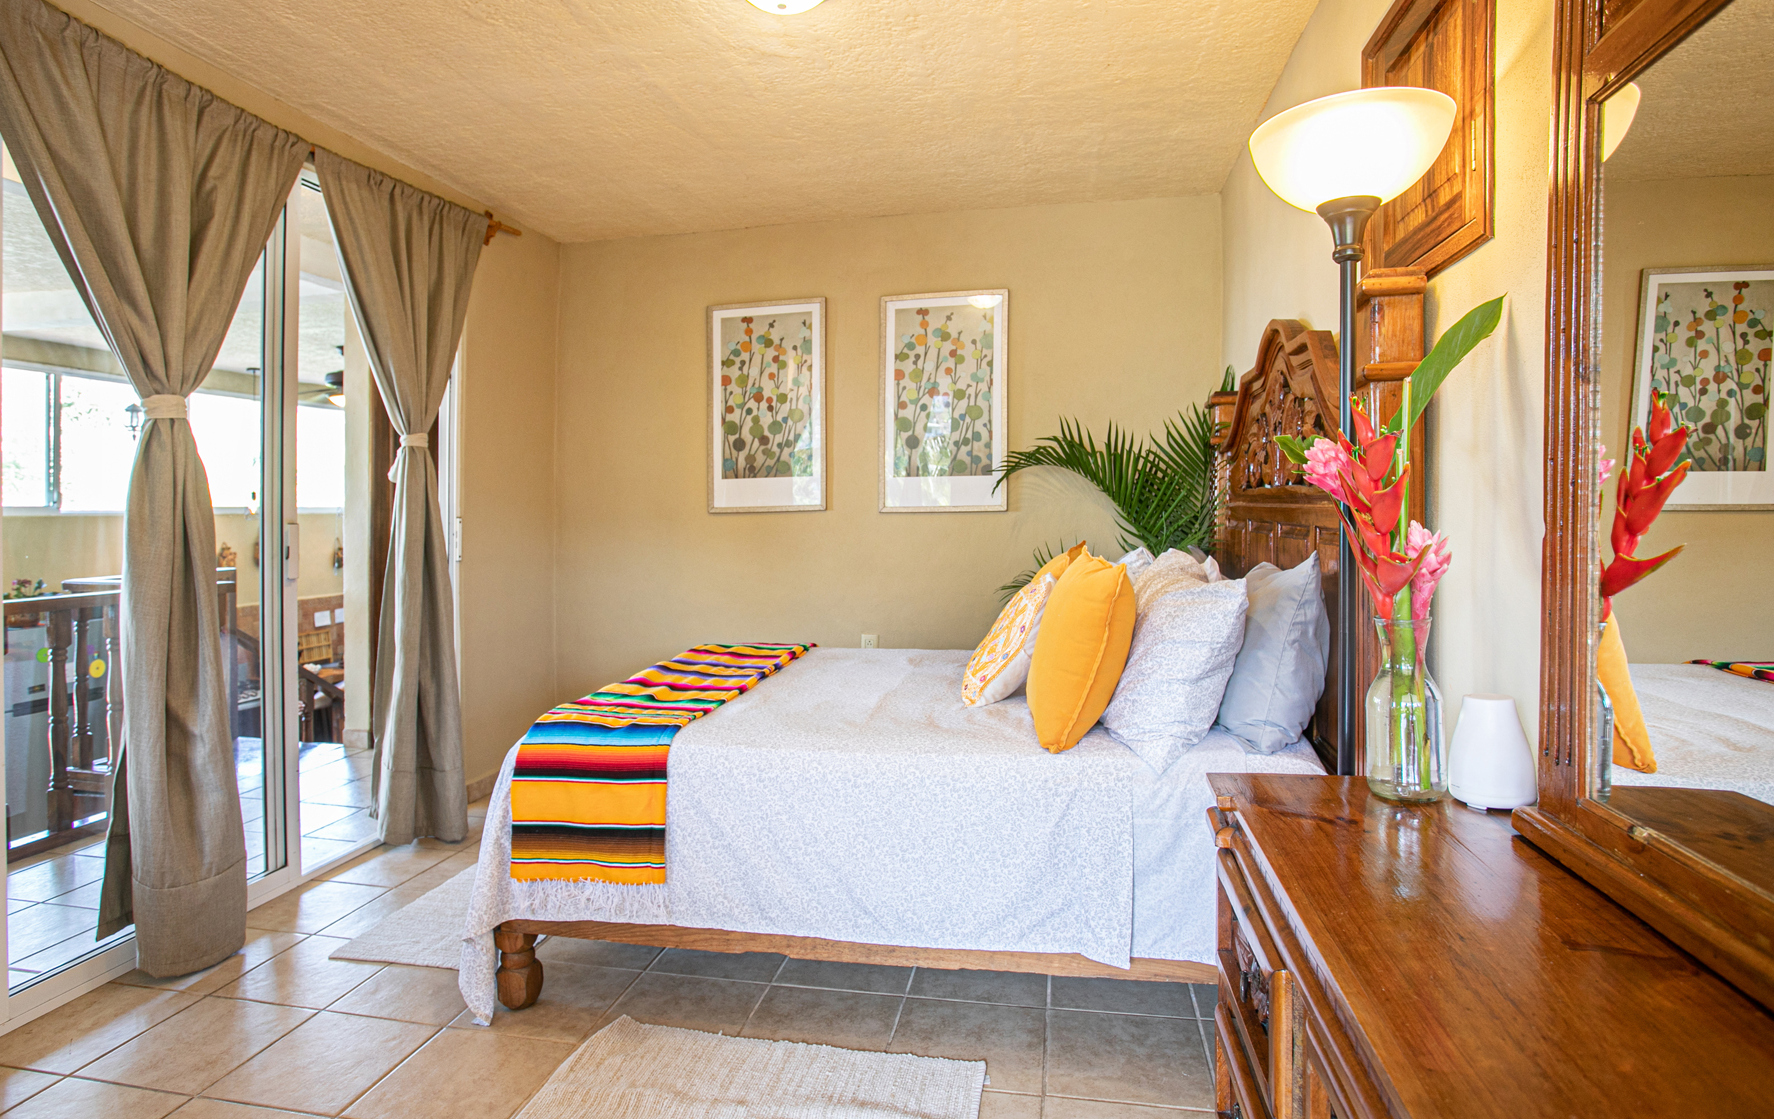 casa palmita, with a spacious bedroom and view of the ocean